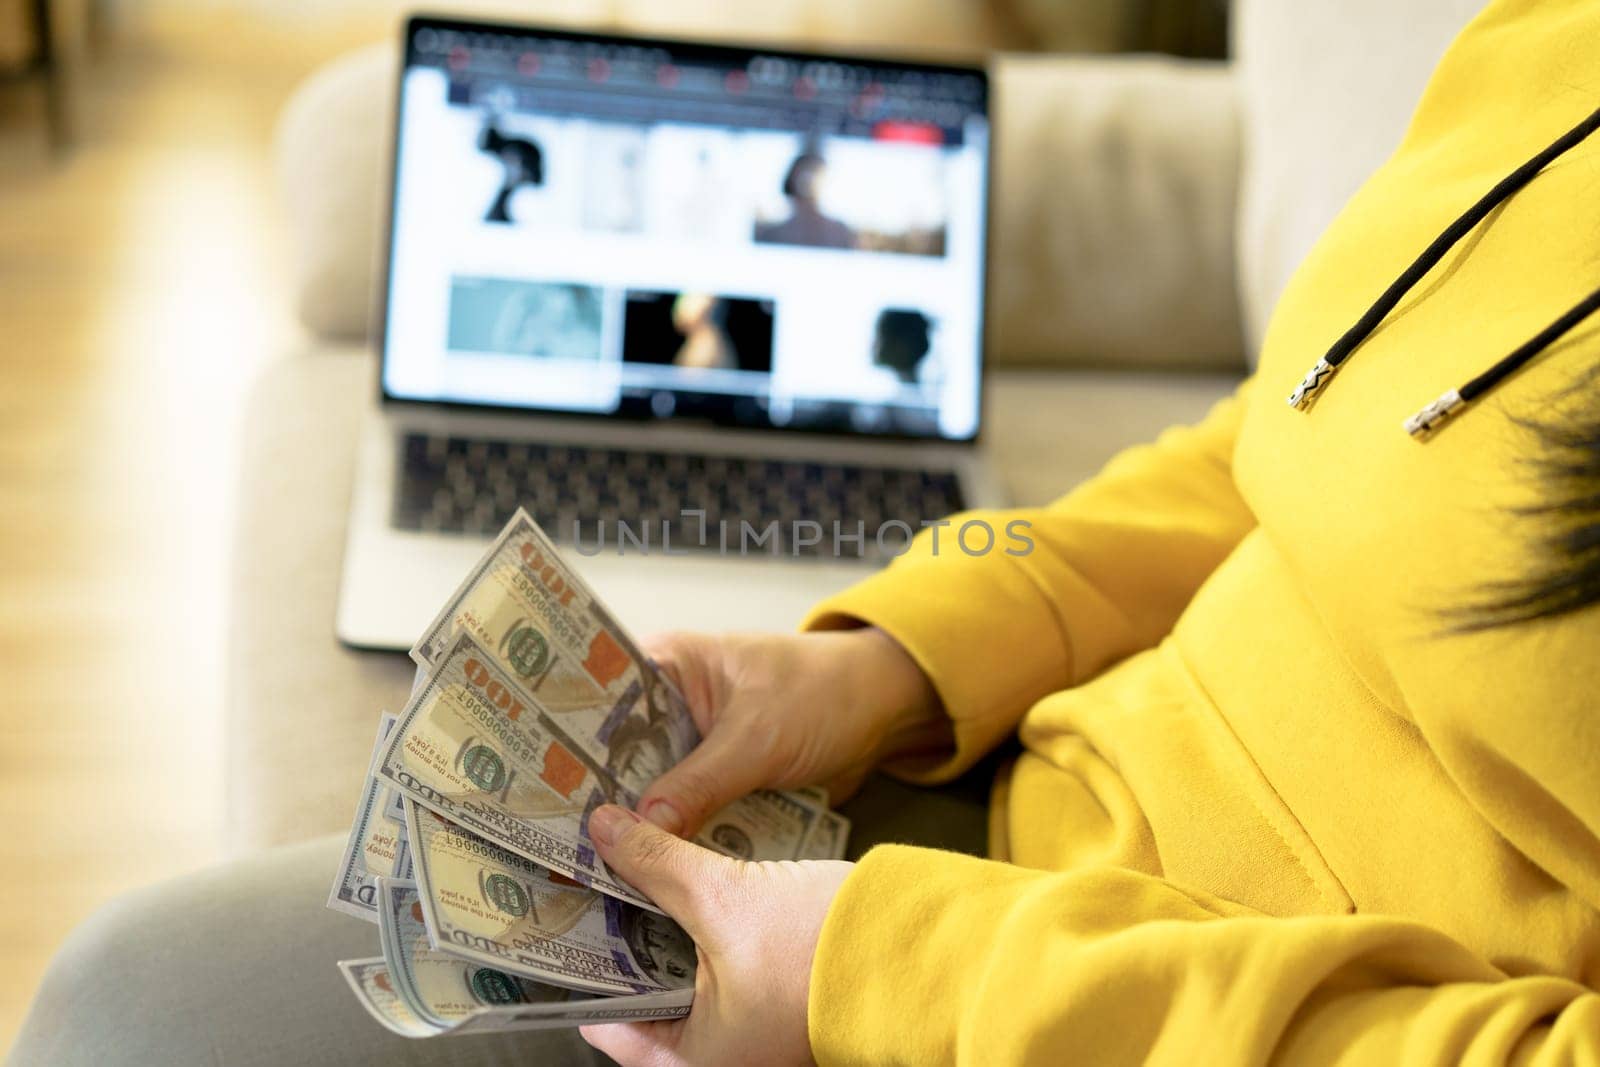 Successful online business concept hands counting dollar bills background of open laptop. It conveys idea of financial success, wealth management, and profitability, providing inspiring image for business and finance-related projects. High quality photo